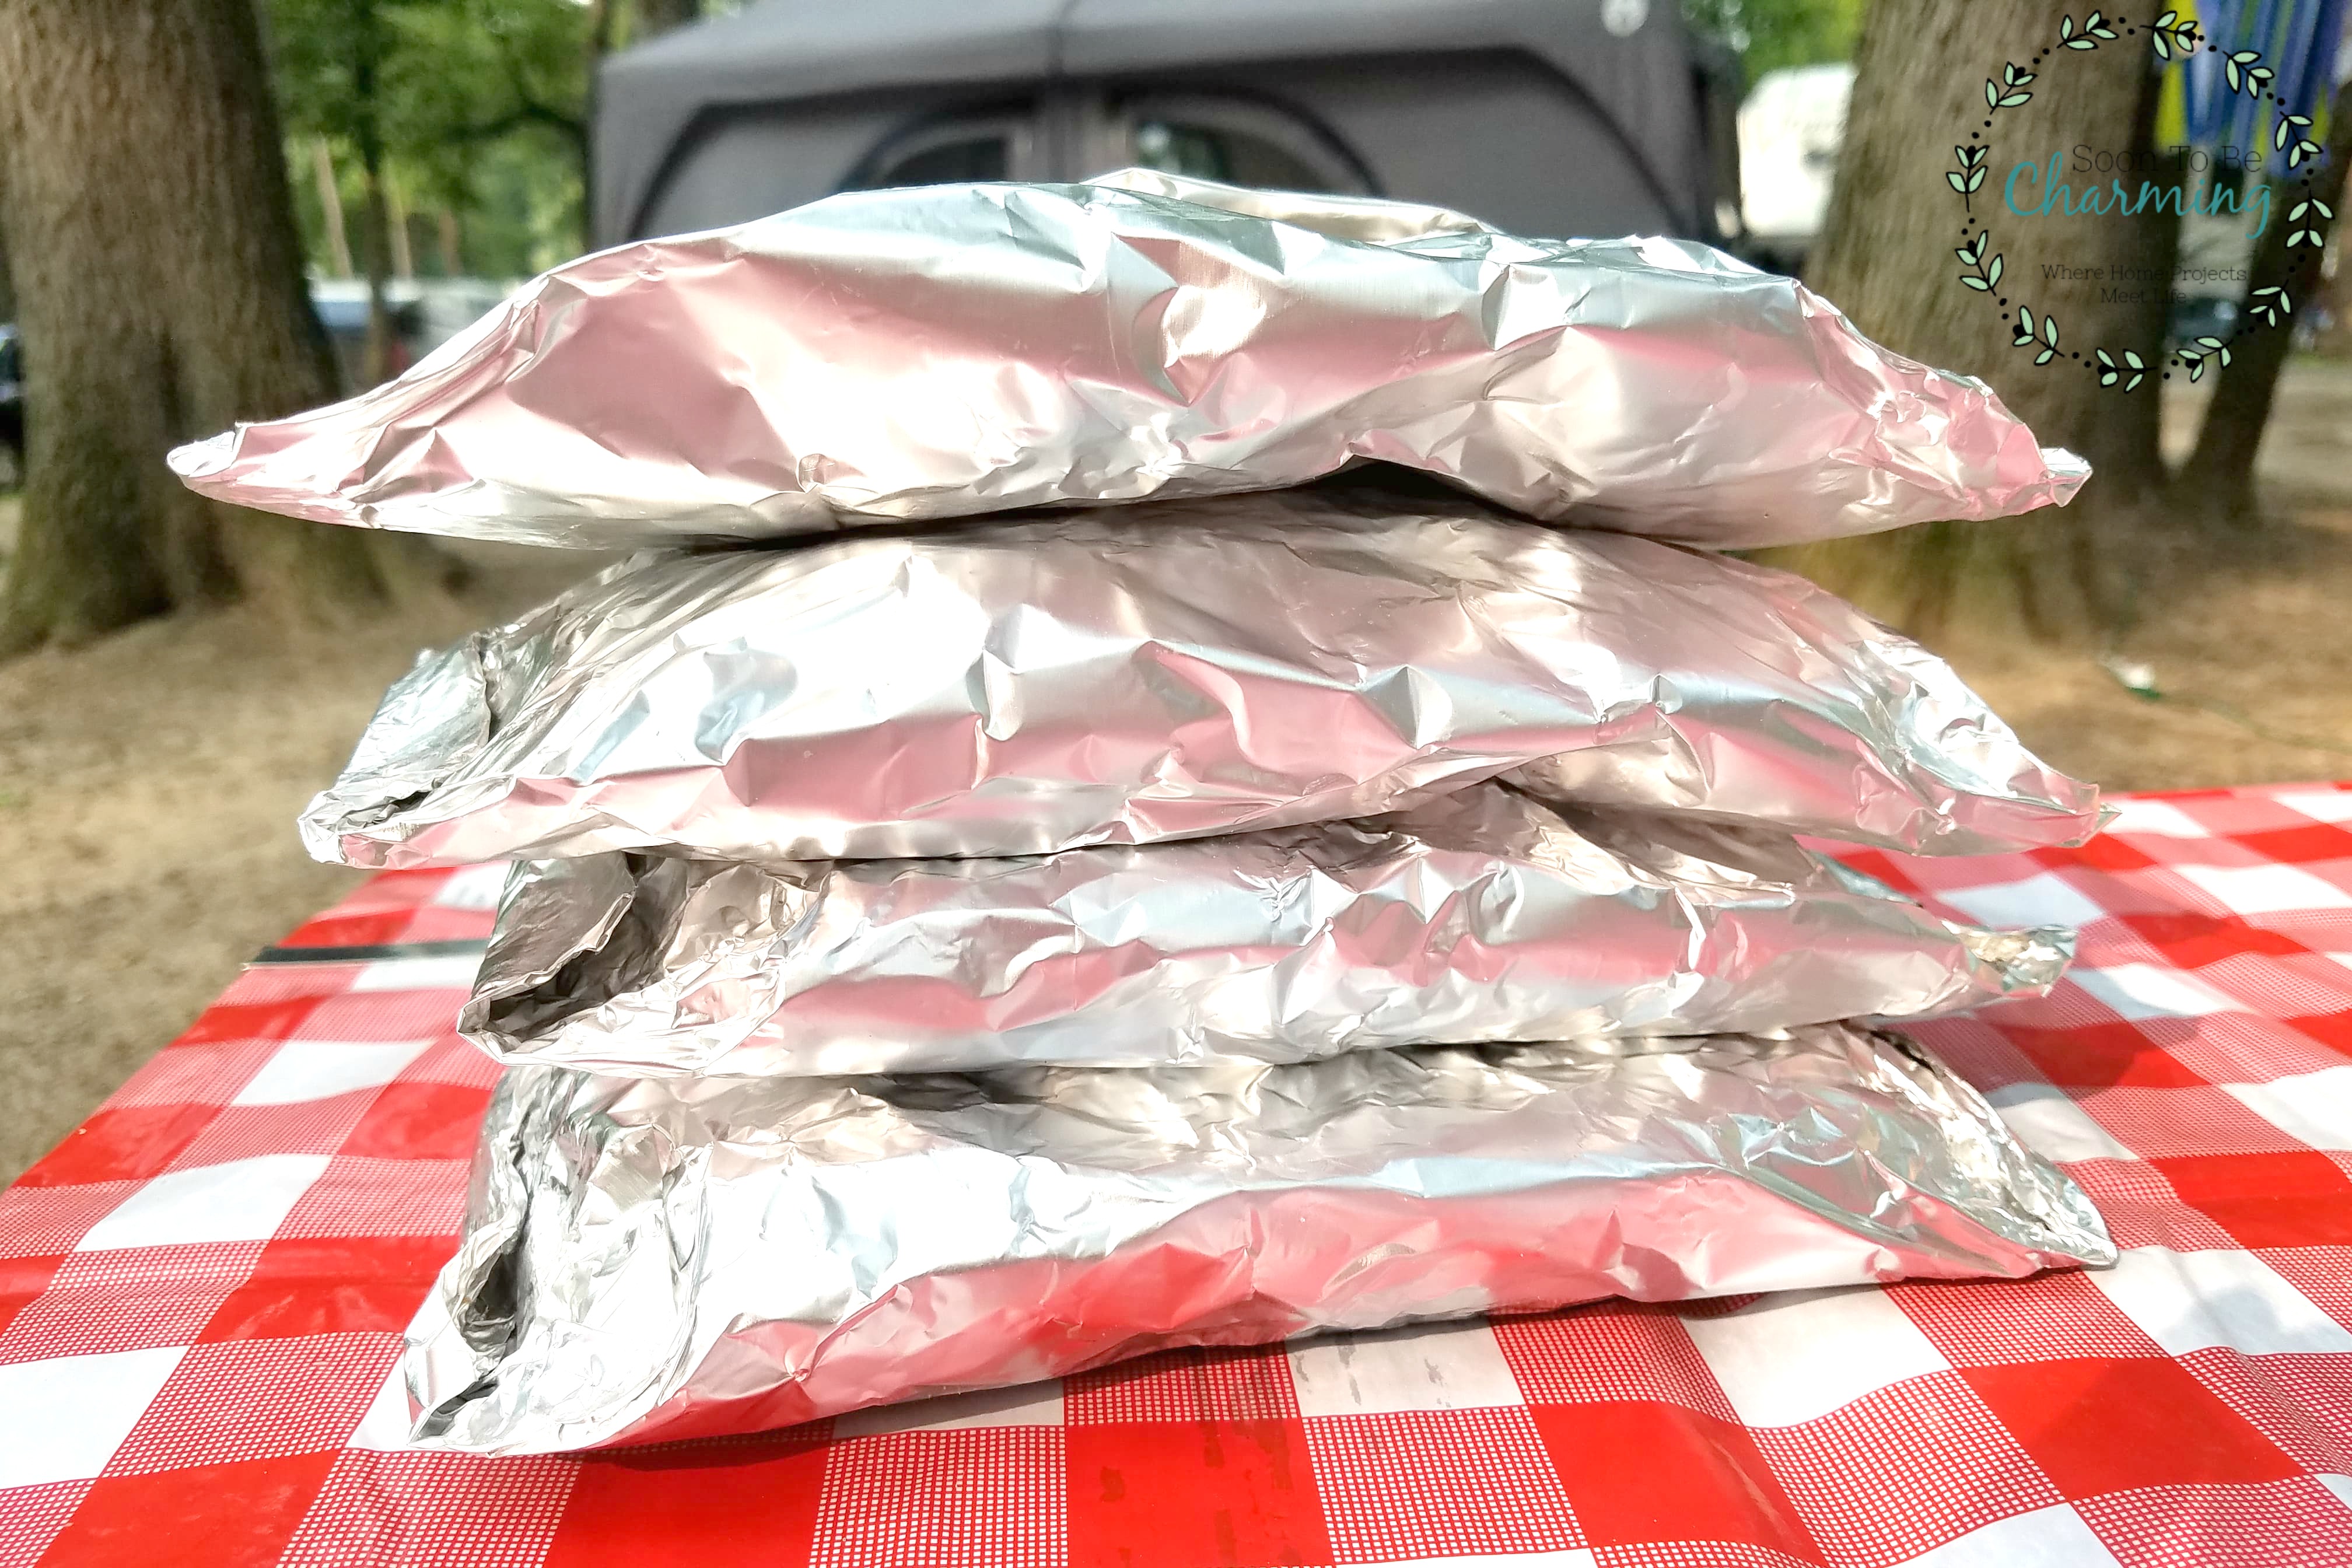 Sausage and Potato Foil Packets